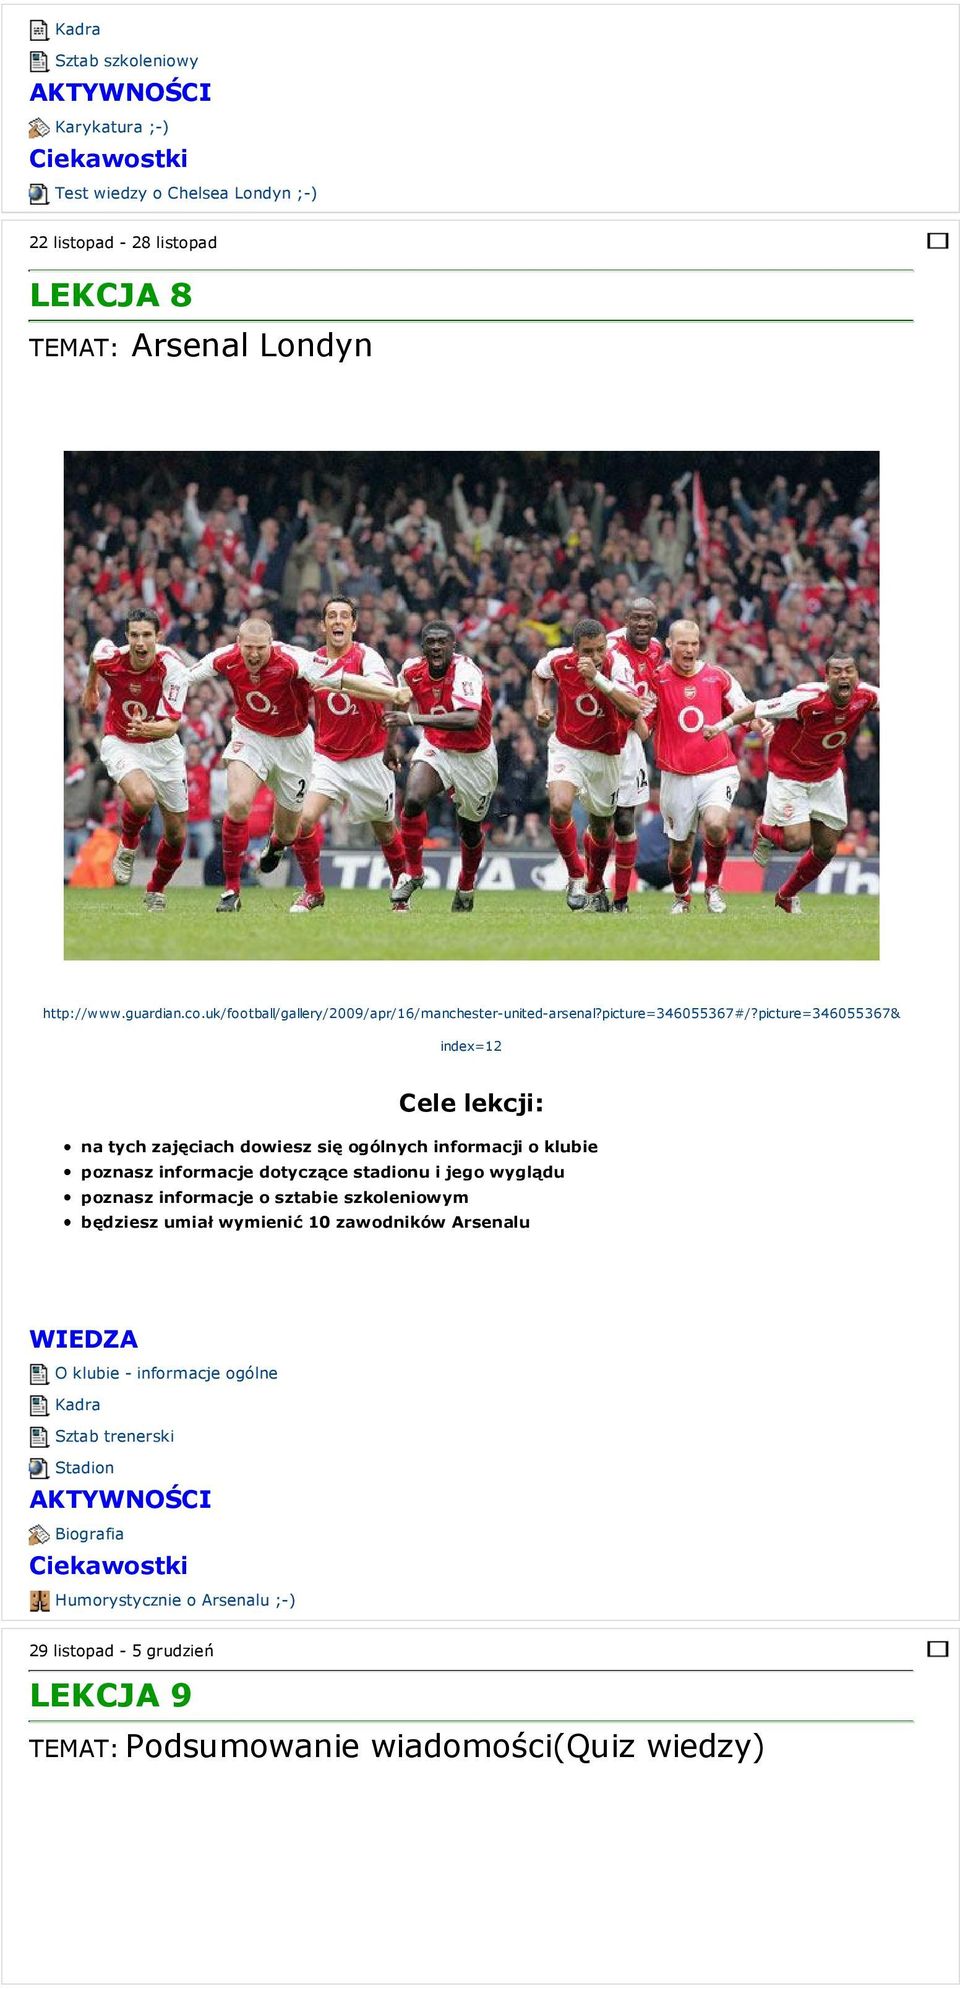 uk/football/gallery/2009/apr/16/manchester-united-arsenal?picture=346055367#/?